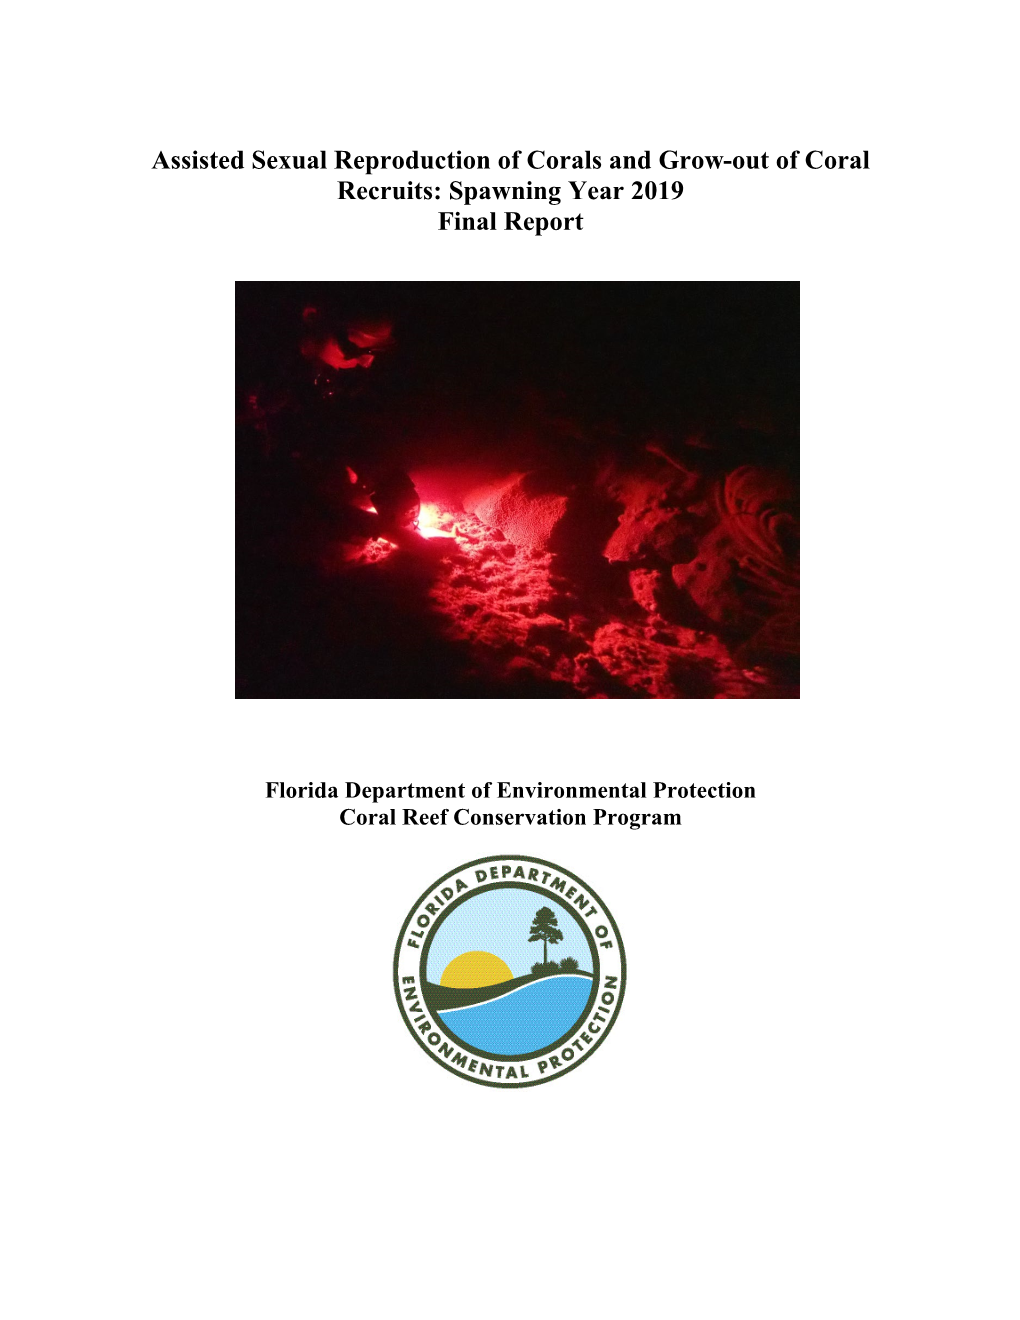 Assisted Sexual Reproduction of Corals and Grow-Out of Coral Recruits: Spawning Year 2019 Final Report